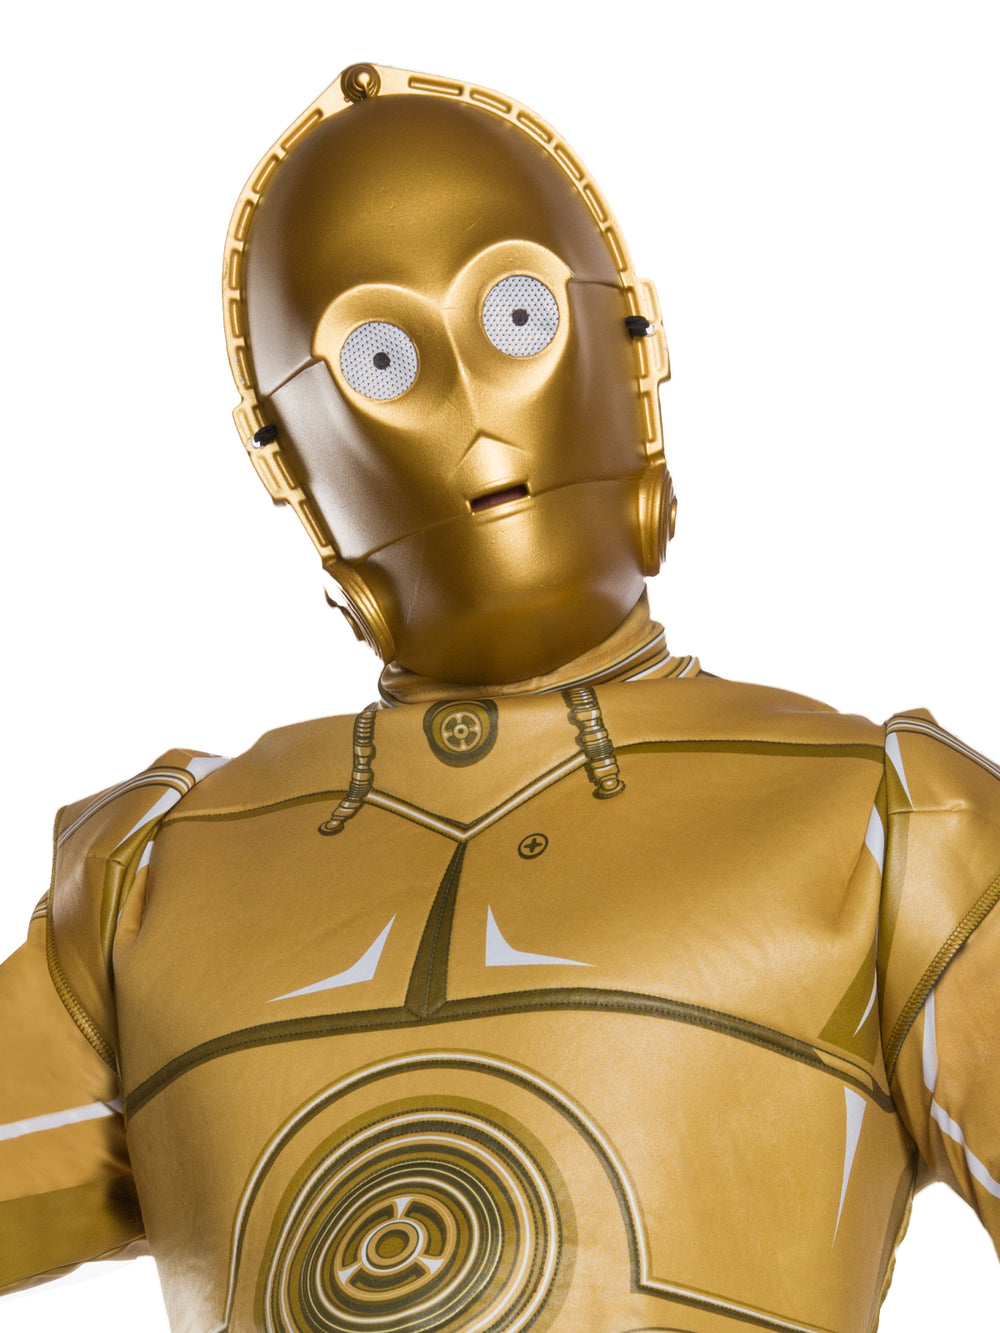 C-3PO DROID DELUXE COSTUME, ADULT - Little Shop of Horrors